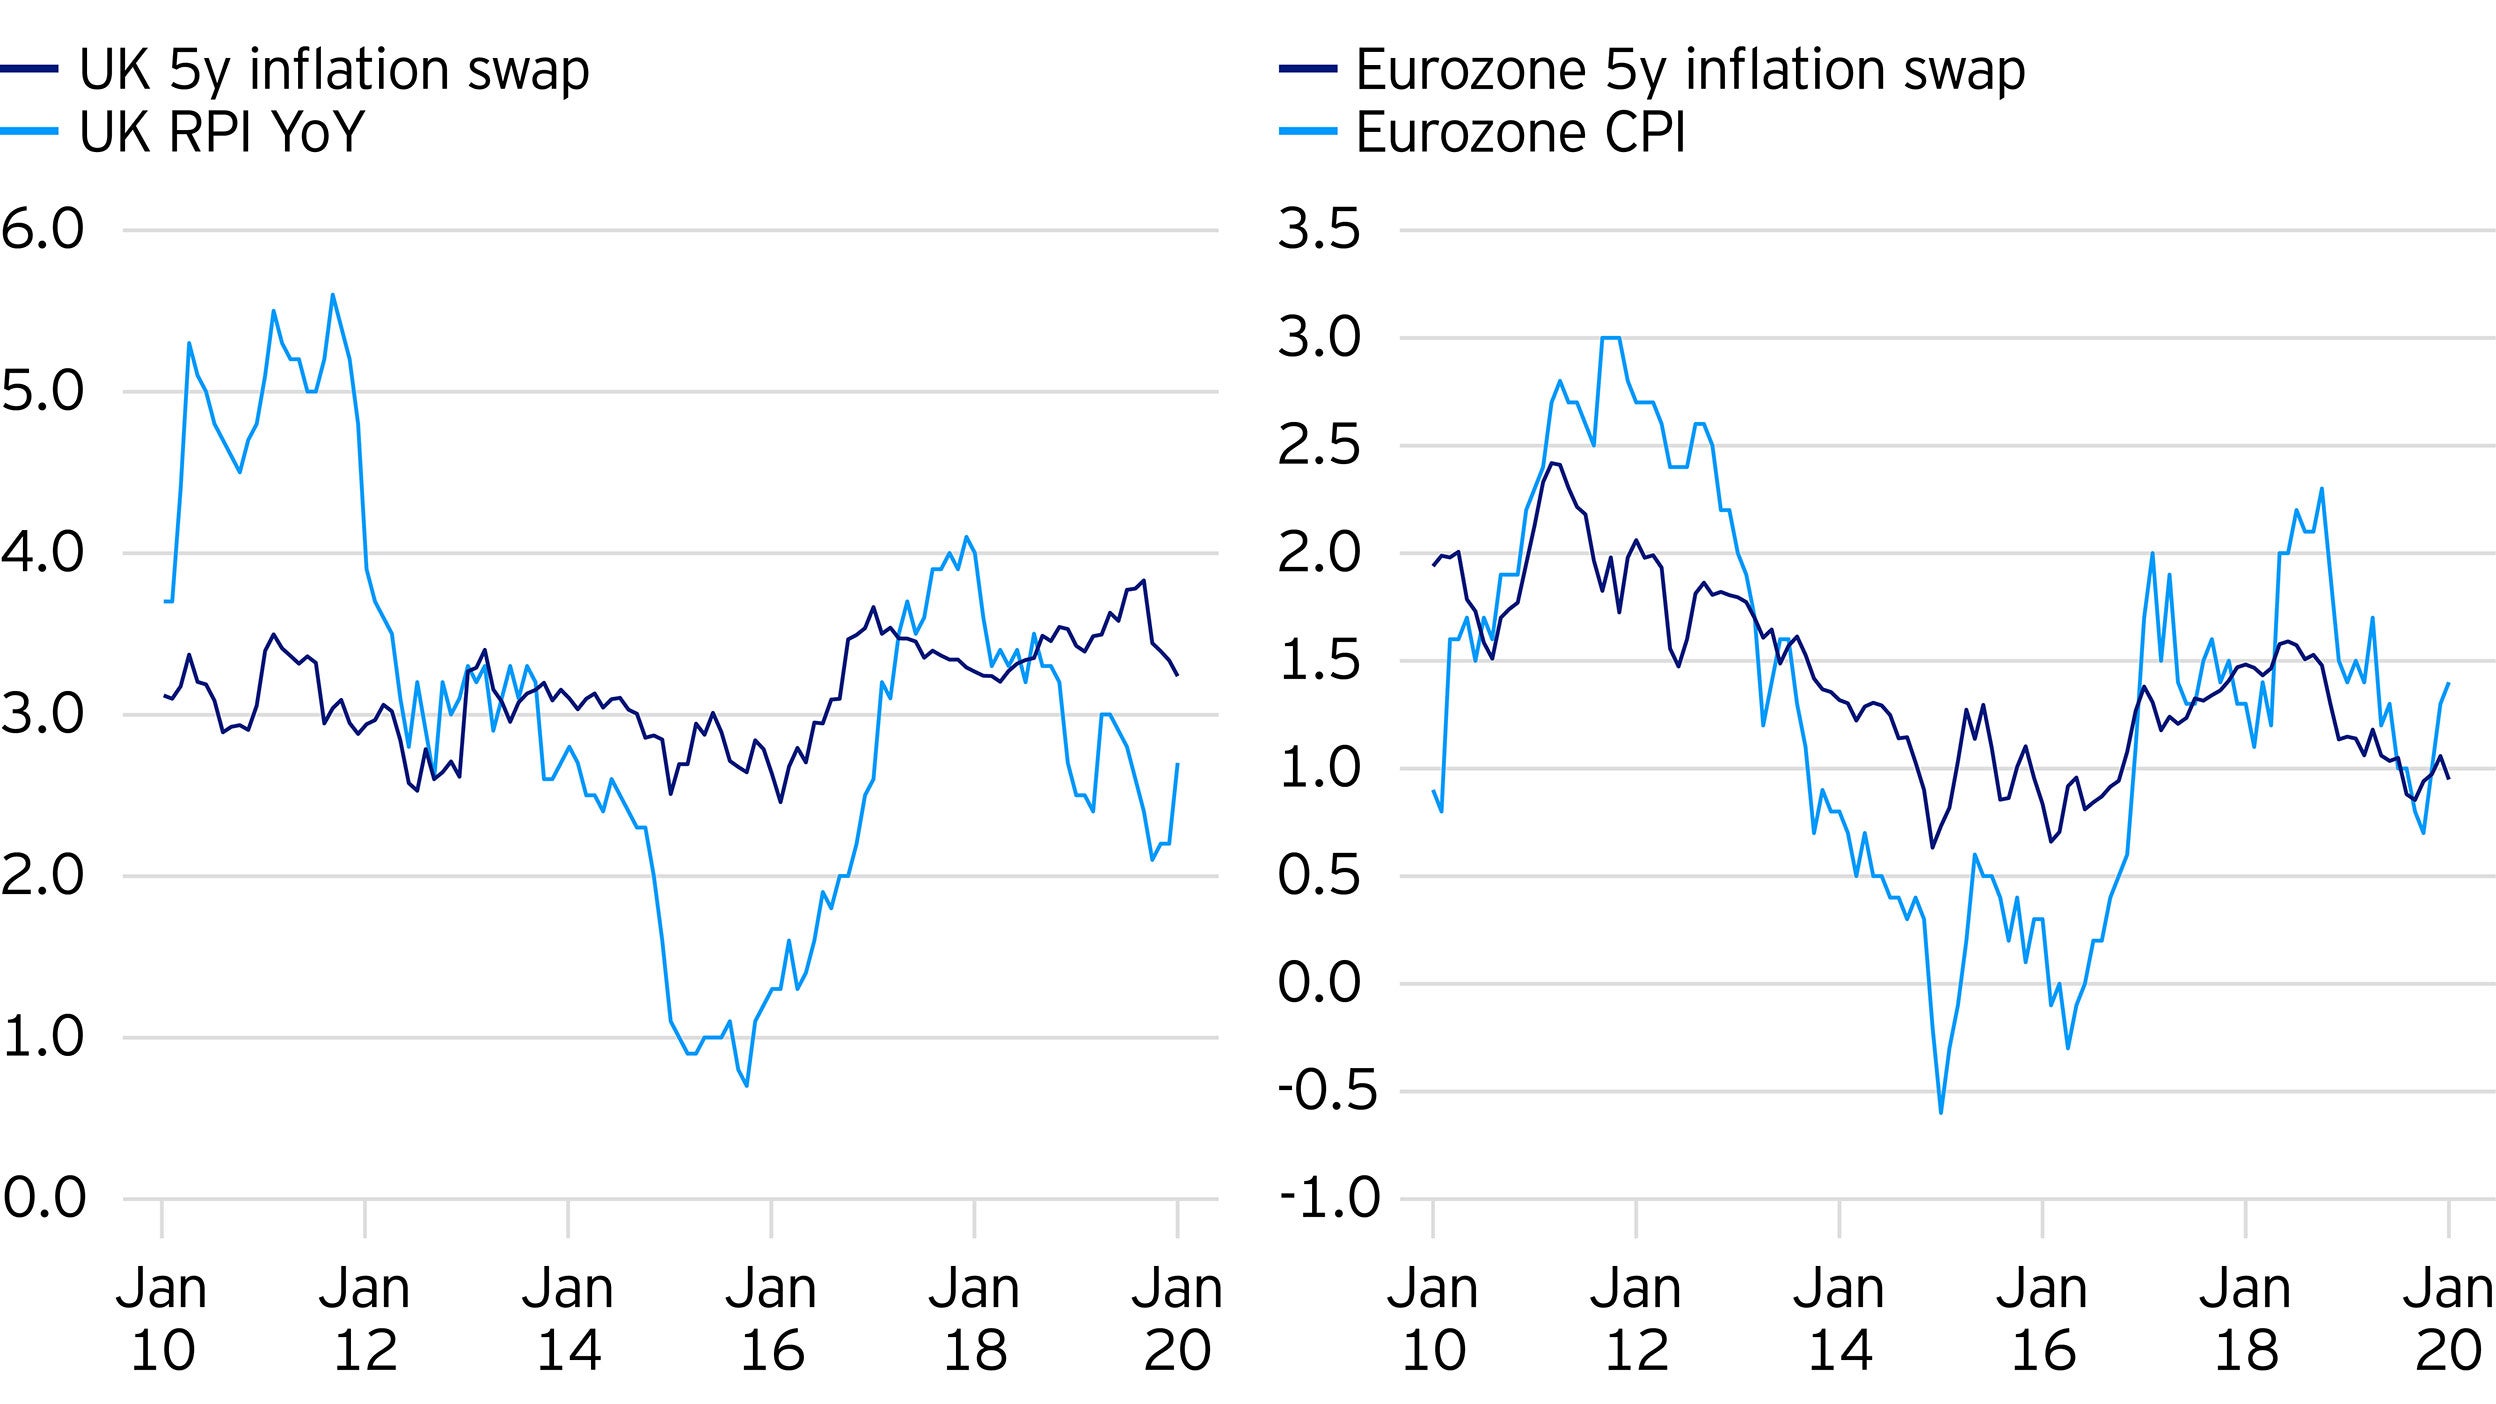 Figure 4: the market is still pricing high inflation for the UK – an anomaly across inflation markets